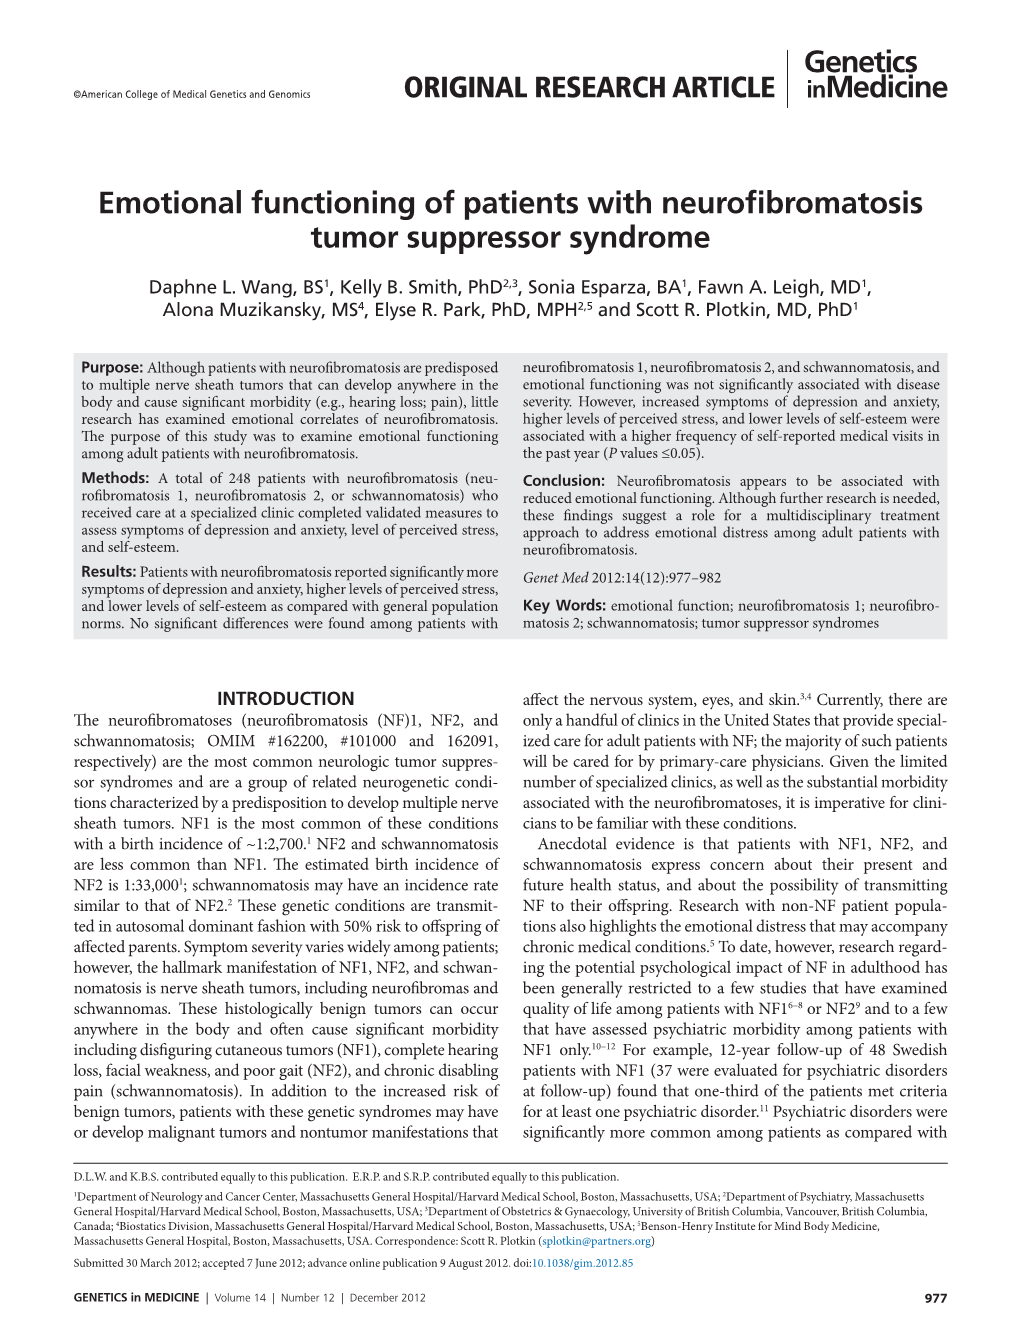 Emotional Functioning of Patients with Neurofibromatosis Tumor Suppressor Syndrome